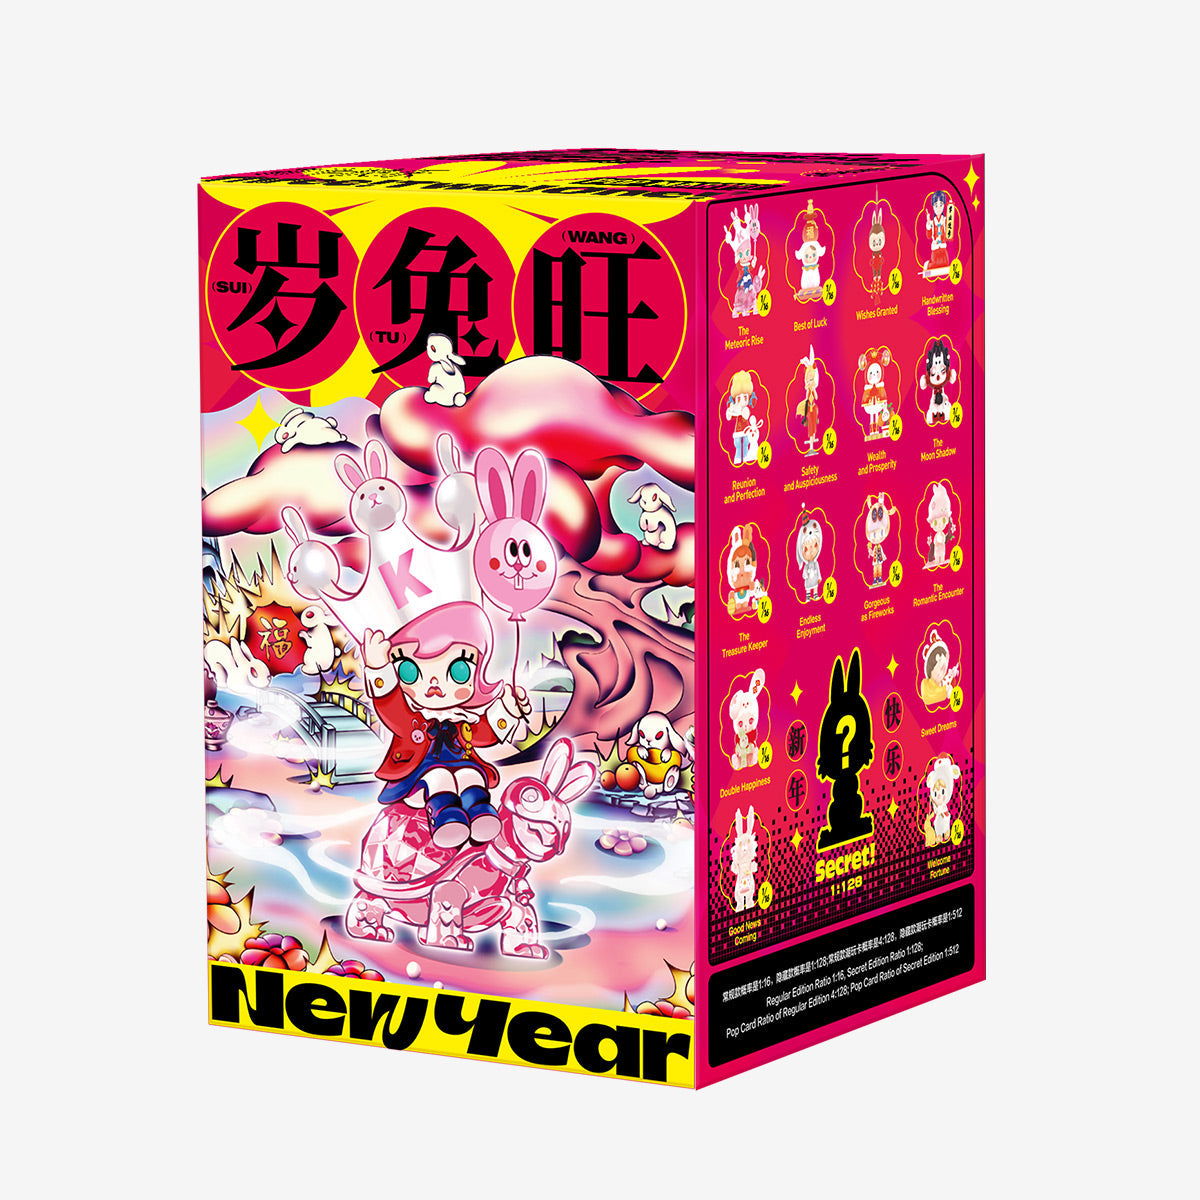 POP MART Three, Two, One! Happy Chinese New Year Series-Single Box (Random)-Pop Mart-Ace Cards &amp; Collectibles